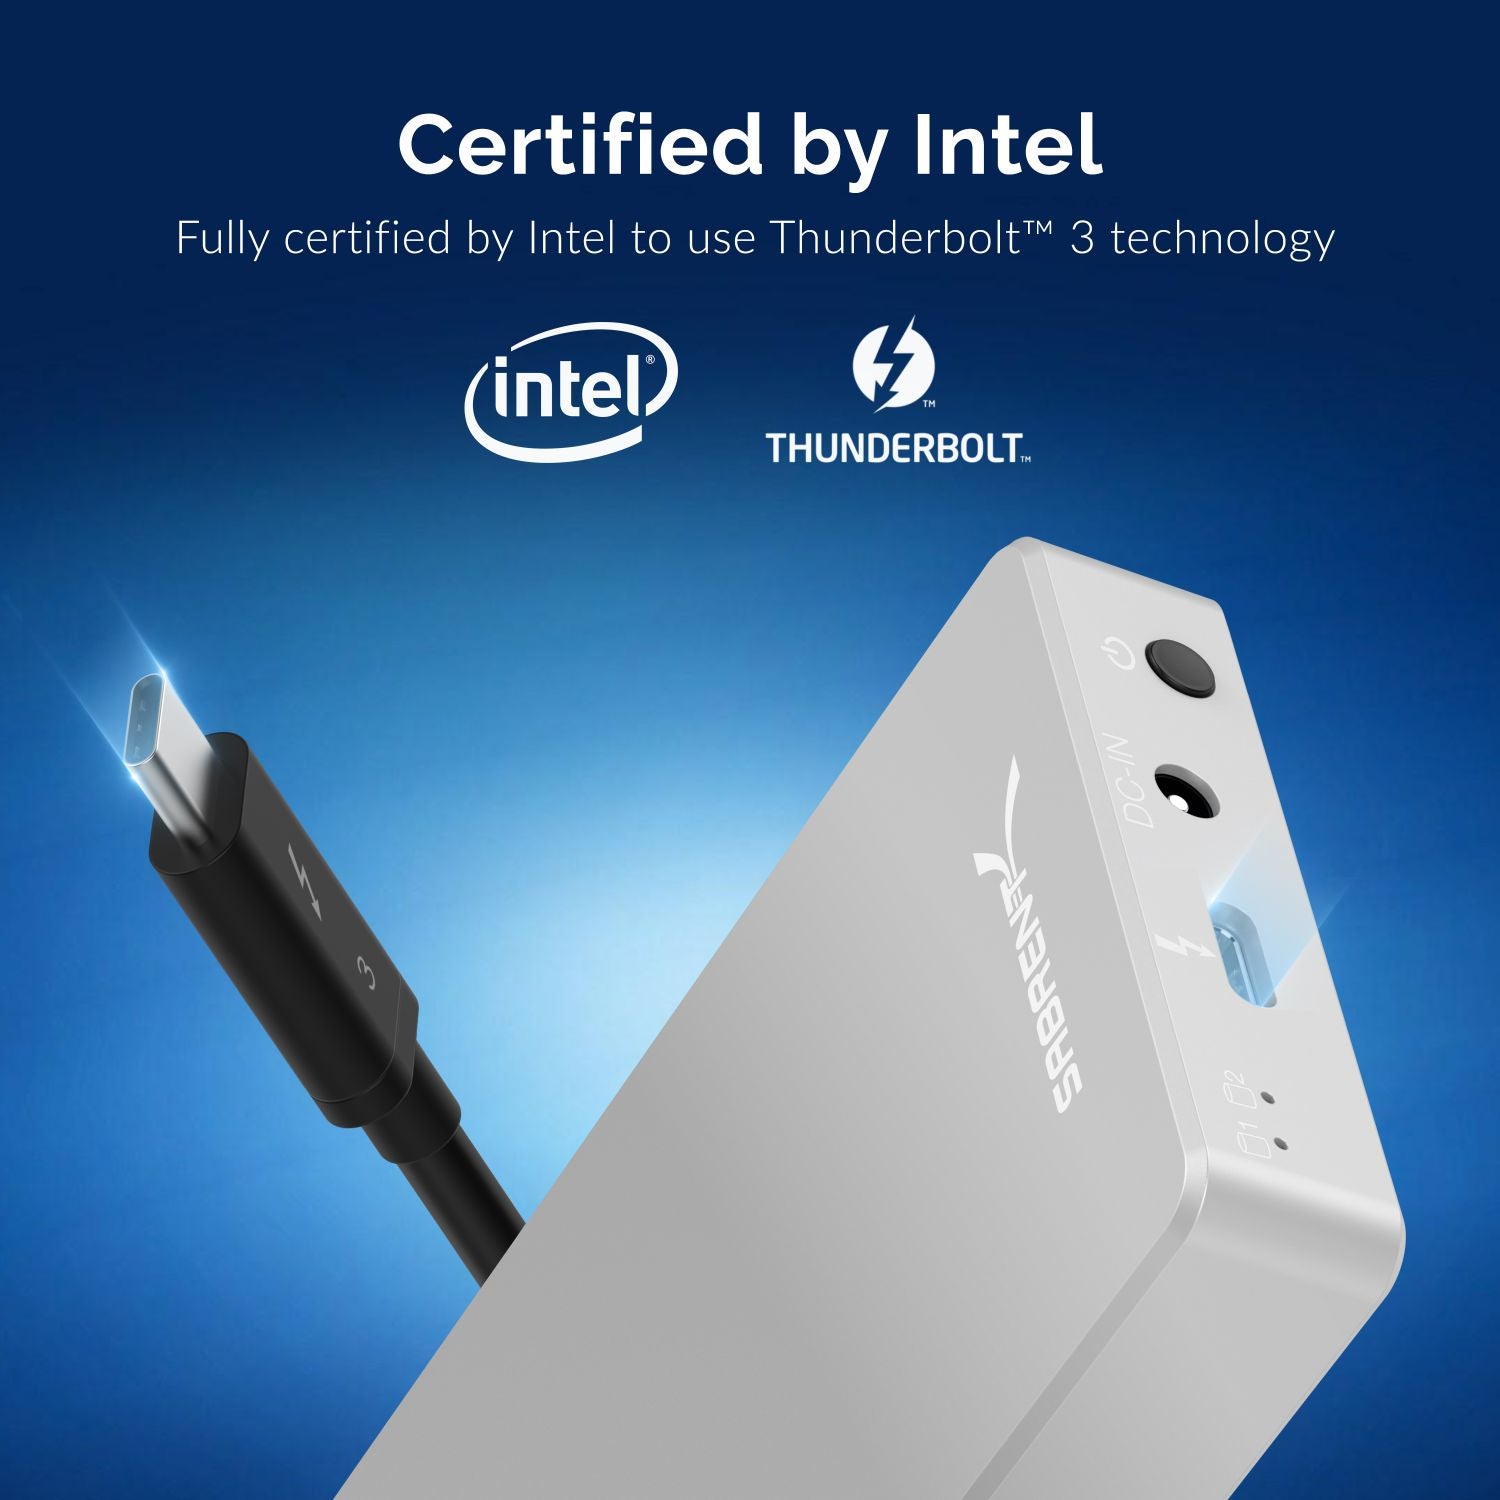 High Quality Thunderbolt 3 To Ssd (support M2 Nvme Interface Ssd)  Thunderbolt 3 To Ssd Thunder Iii M2 Ssd Hard Drive Box Set - Pc Hardware  Cables & Adapters - AliExpress